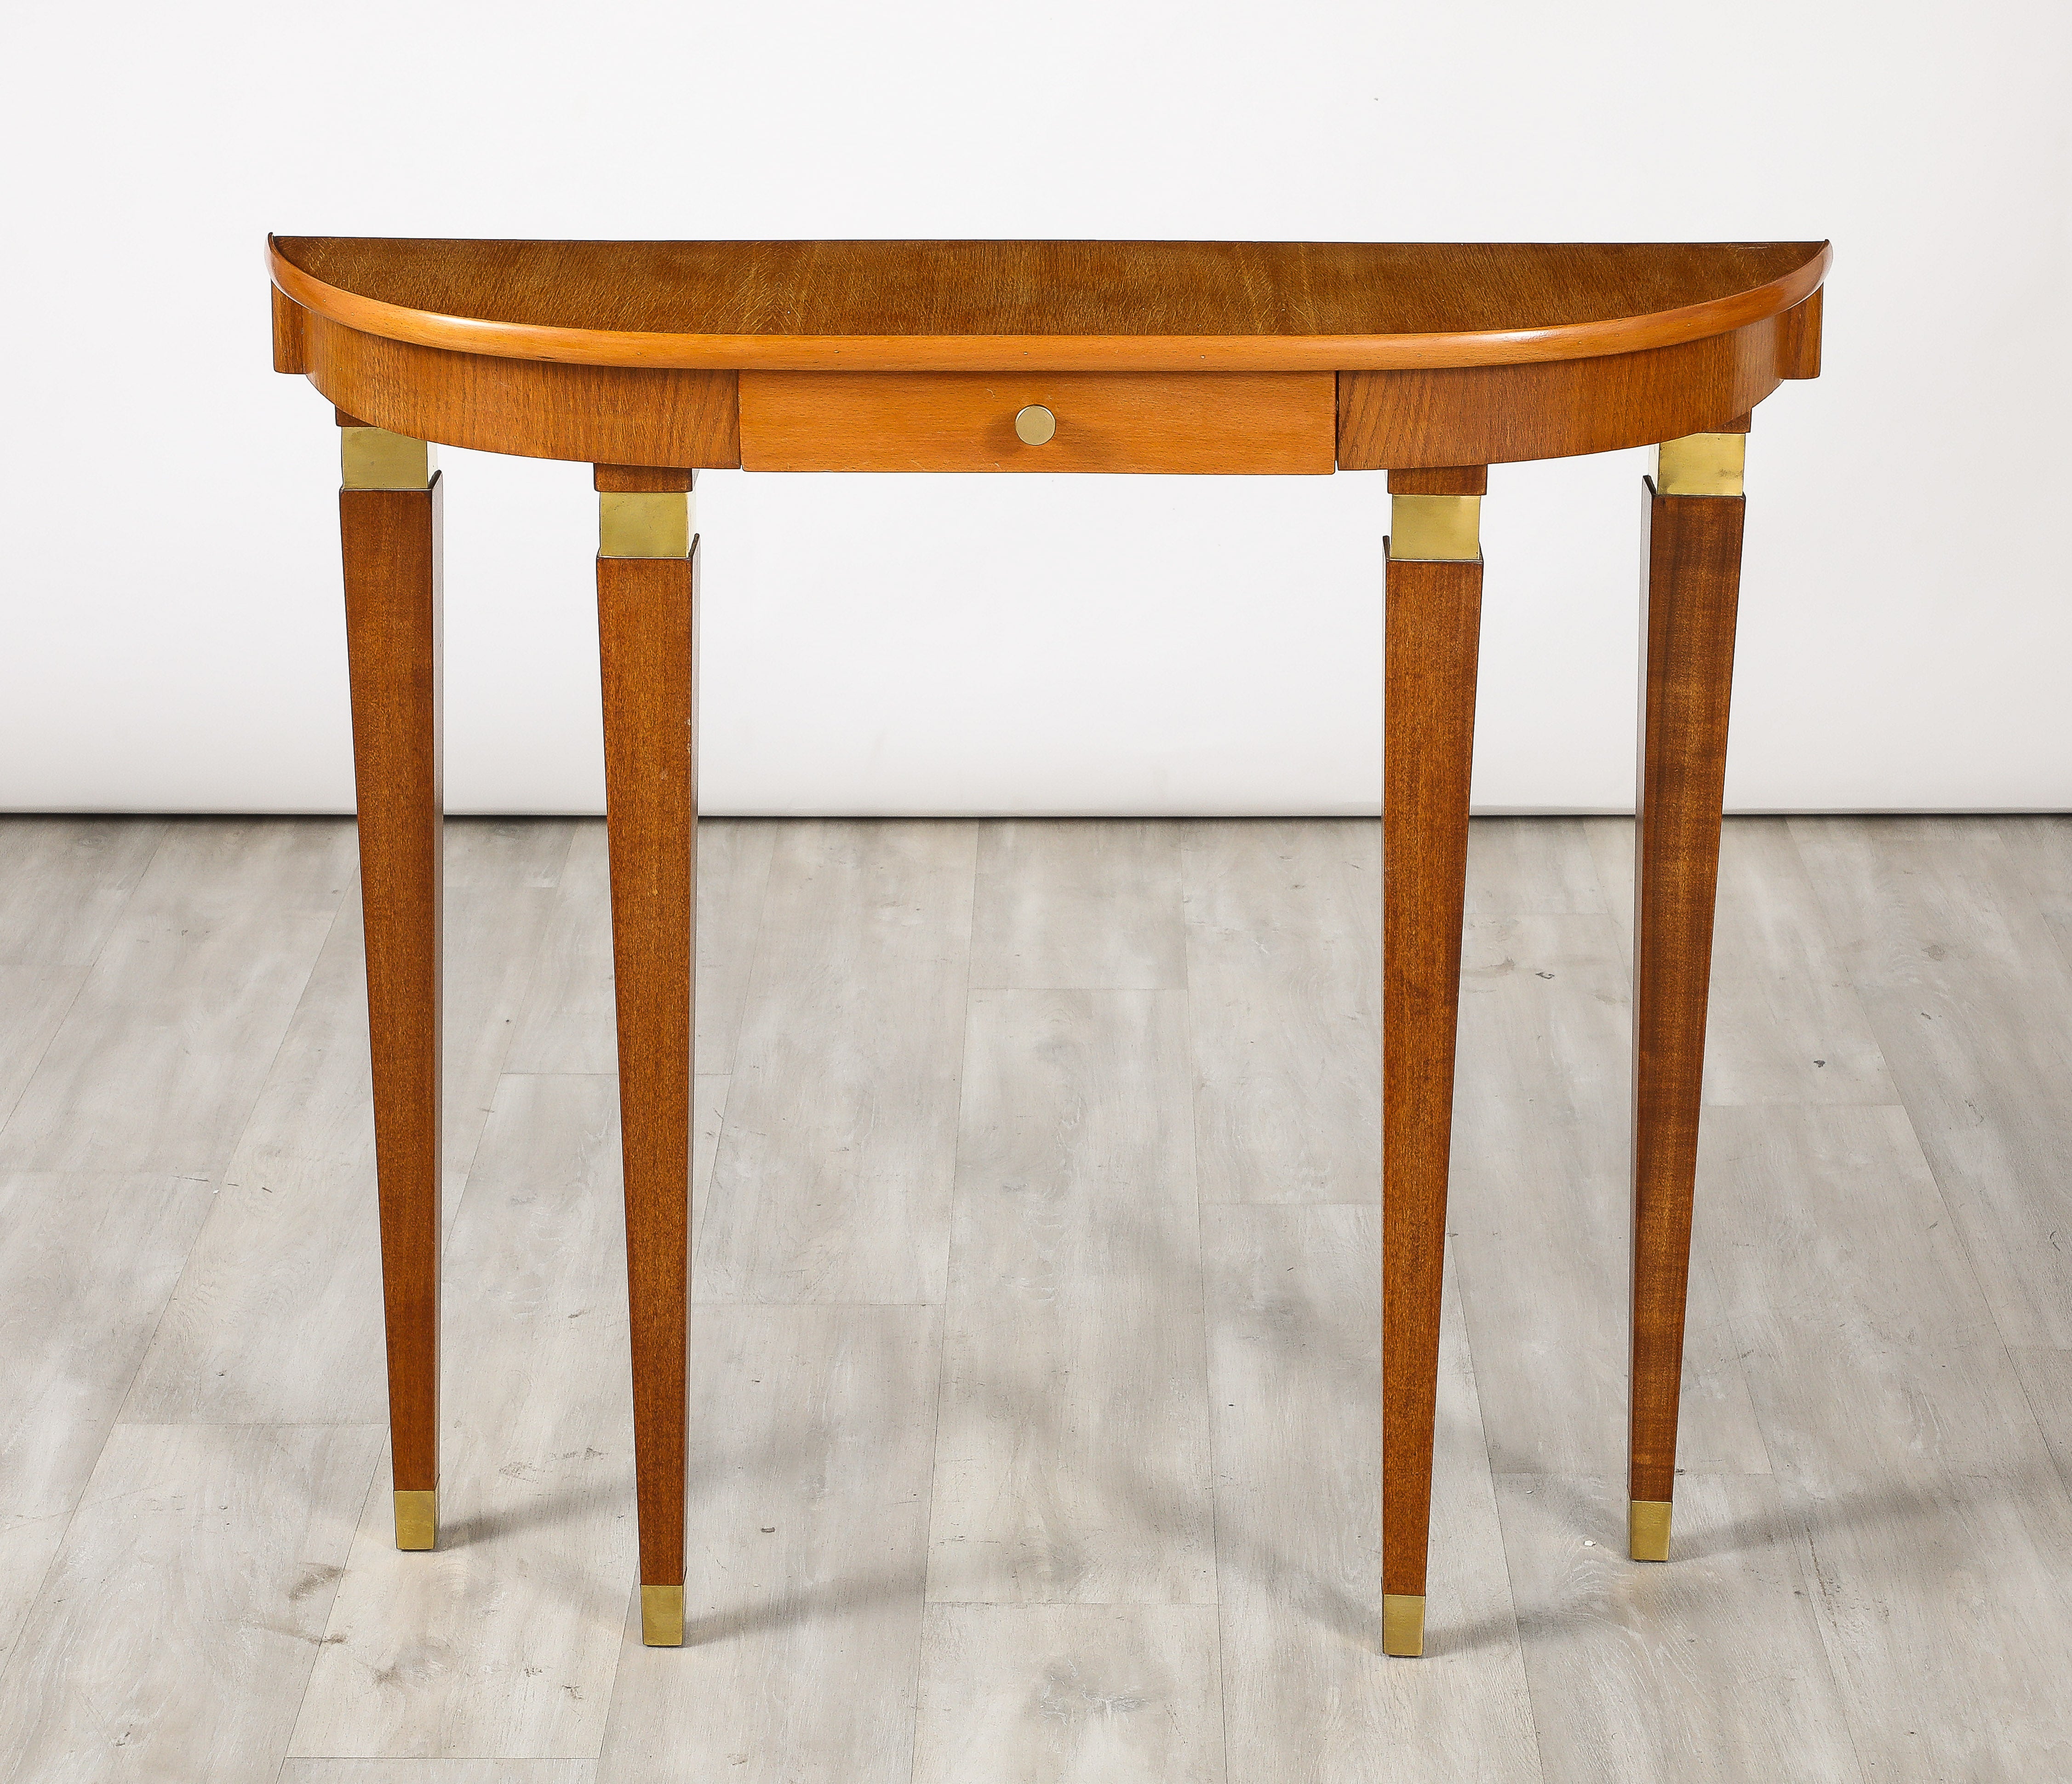 An elegantly appointed Northern Italian console table in maple.  The graceful legs are tapered and have brass banding at the top of each leg and end in brass sabot.  The legs support the demi-lune shaped top with a single drawer.  A very streamlined